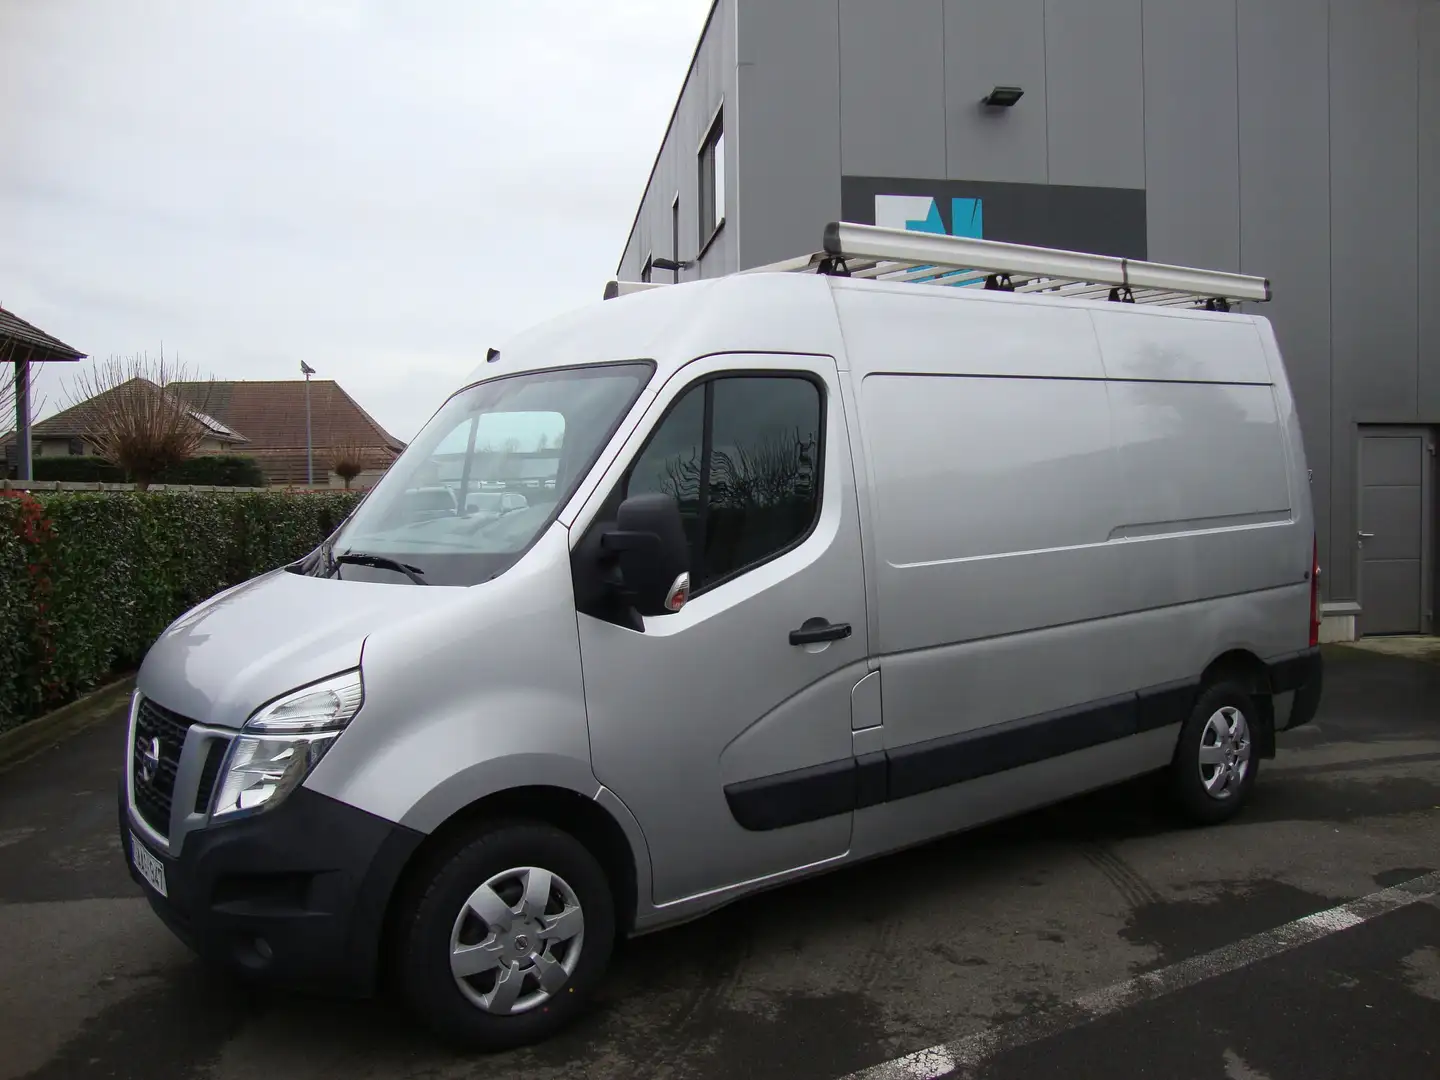 Renault Master 2.3 tdci, L2H2, btw in, gps, 3pl, airco, 2017 Silver - 1